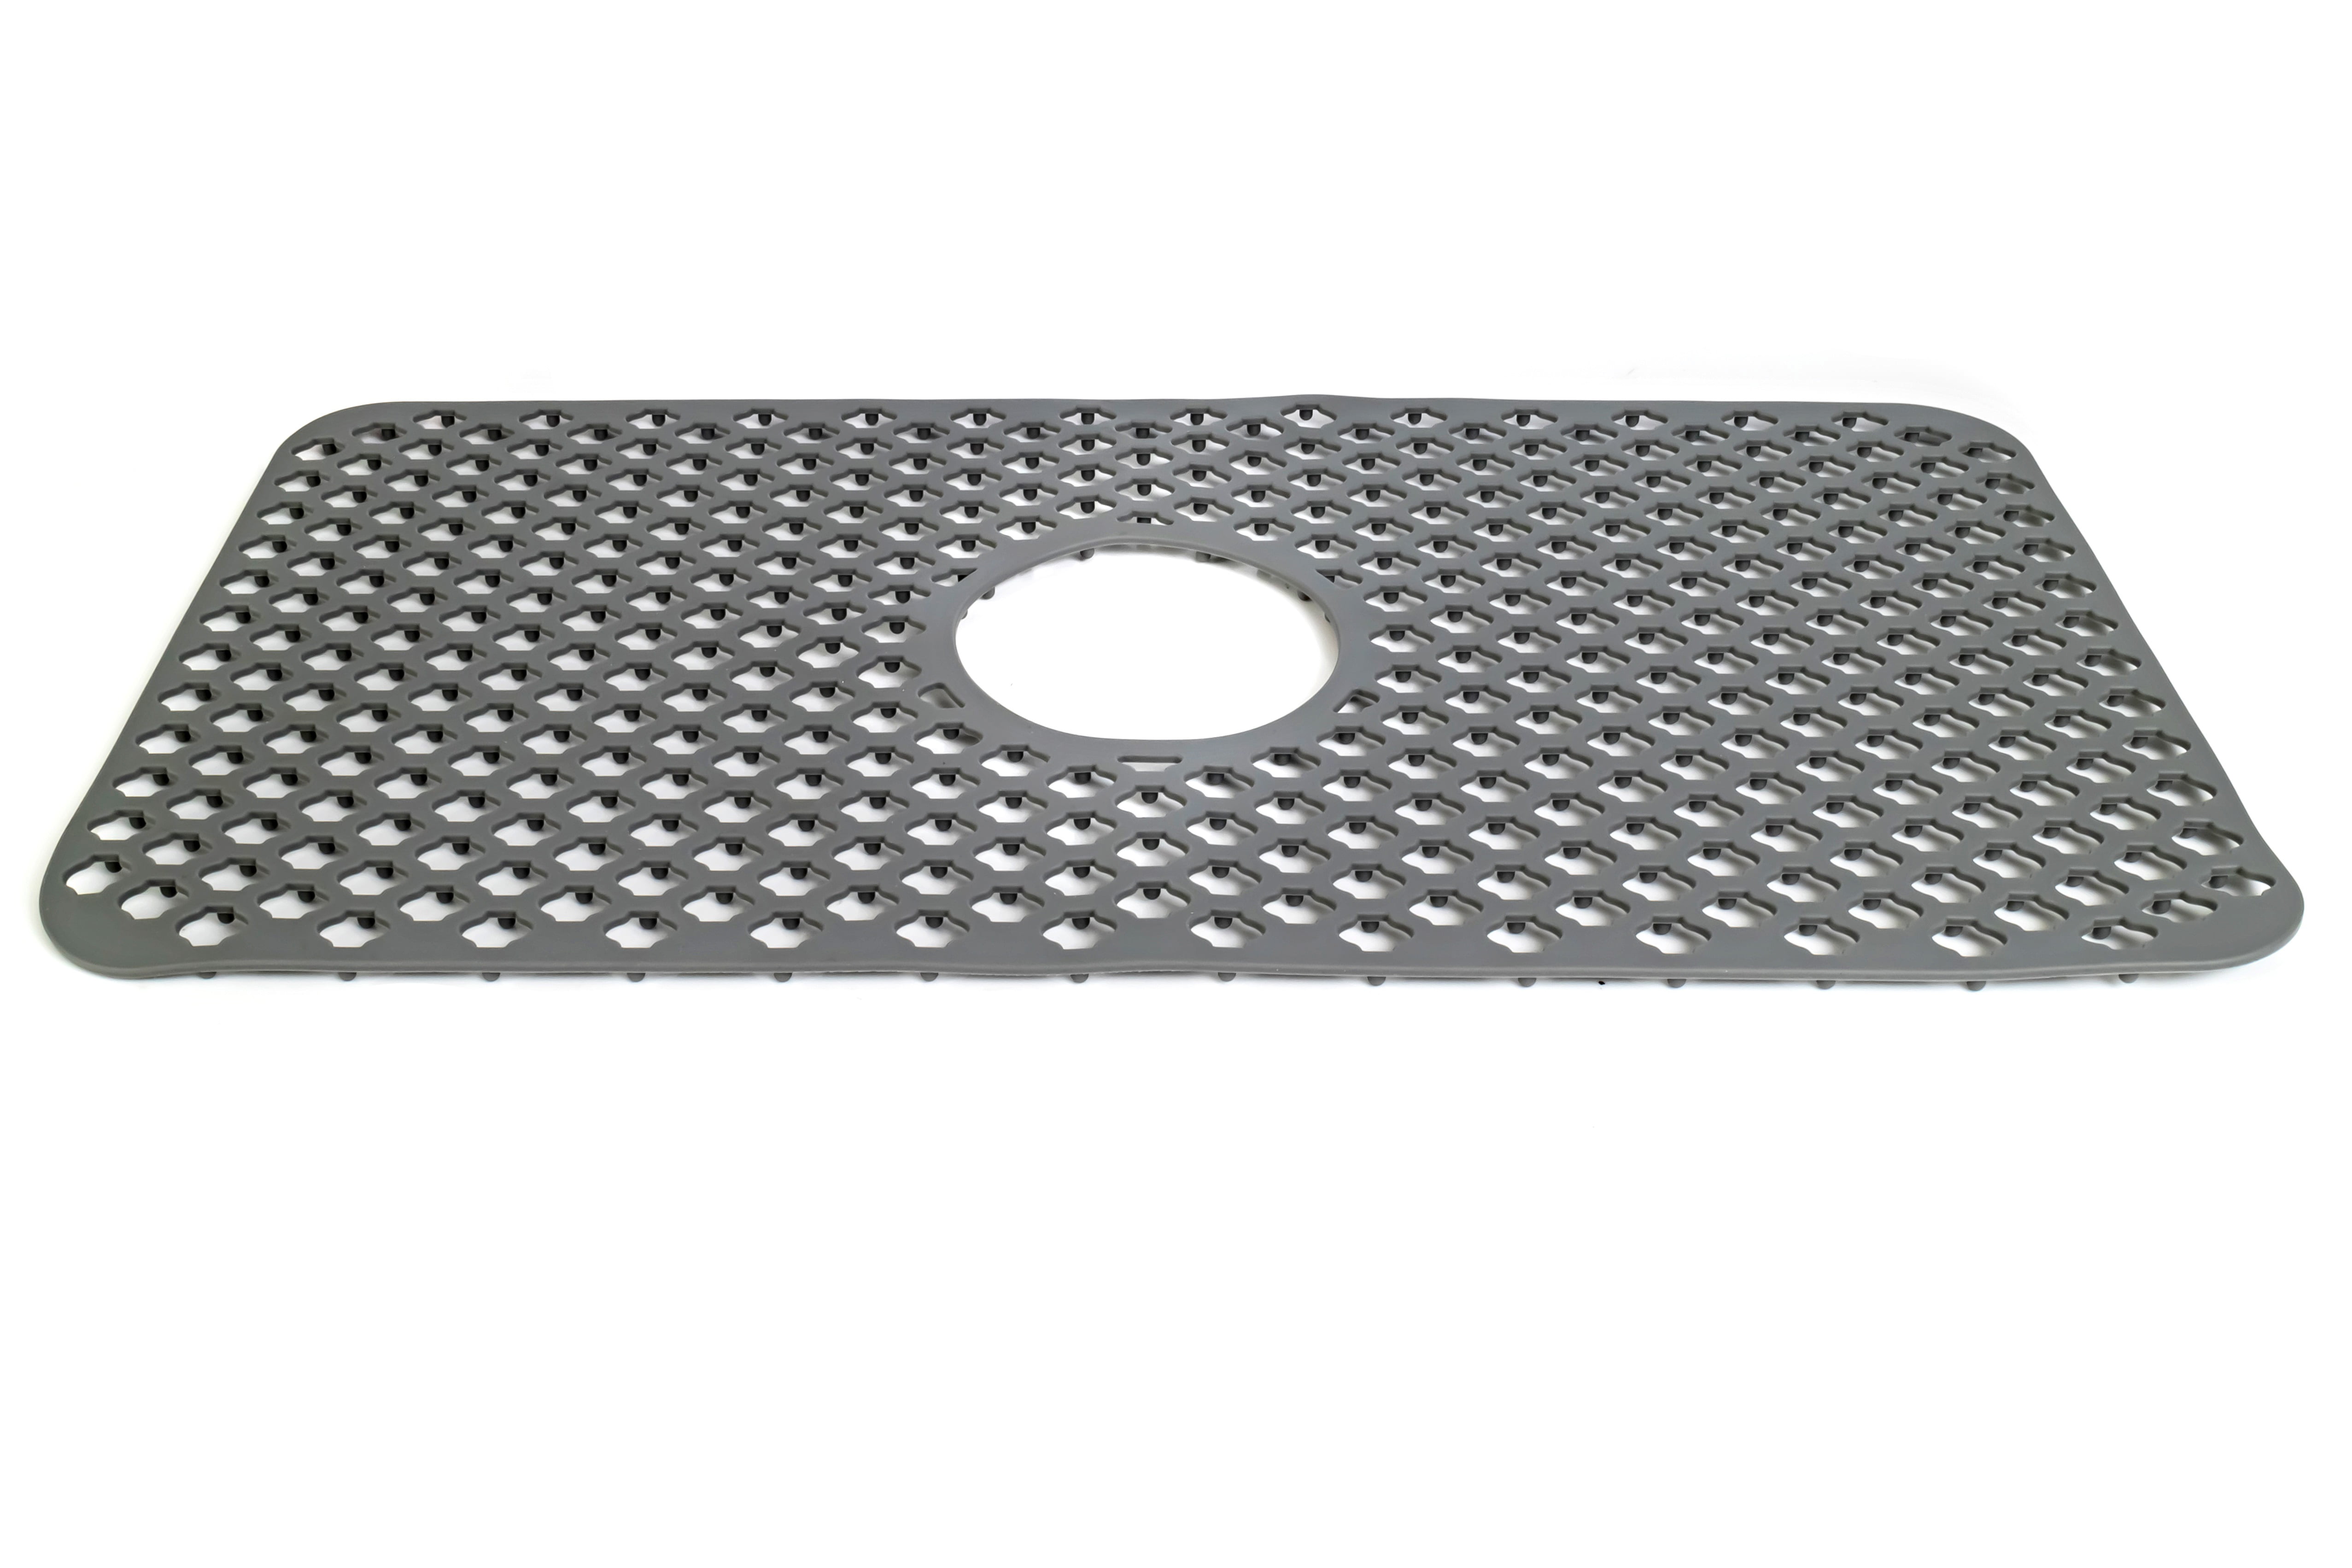 Lazamit Silicone Sink Mat, 24.6''x12.9'' Silicone Sink Protector